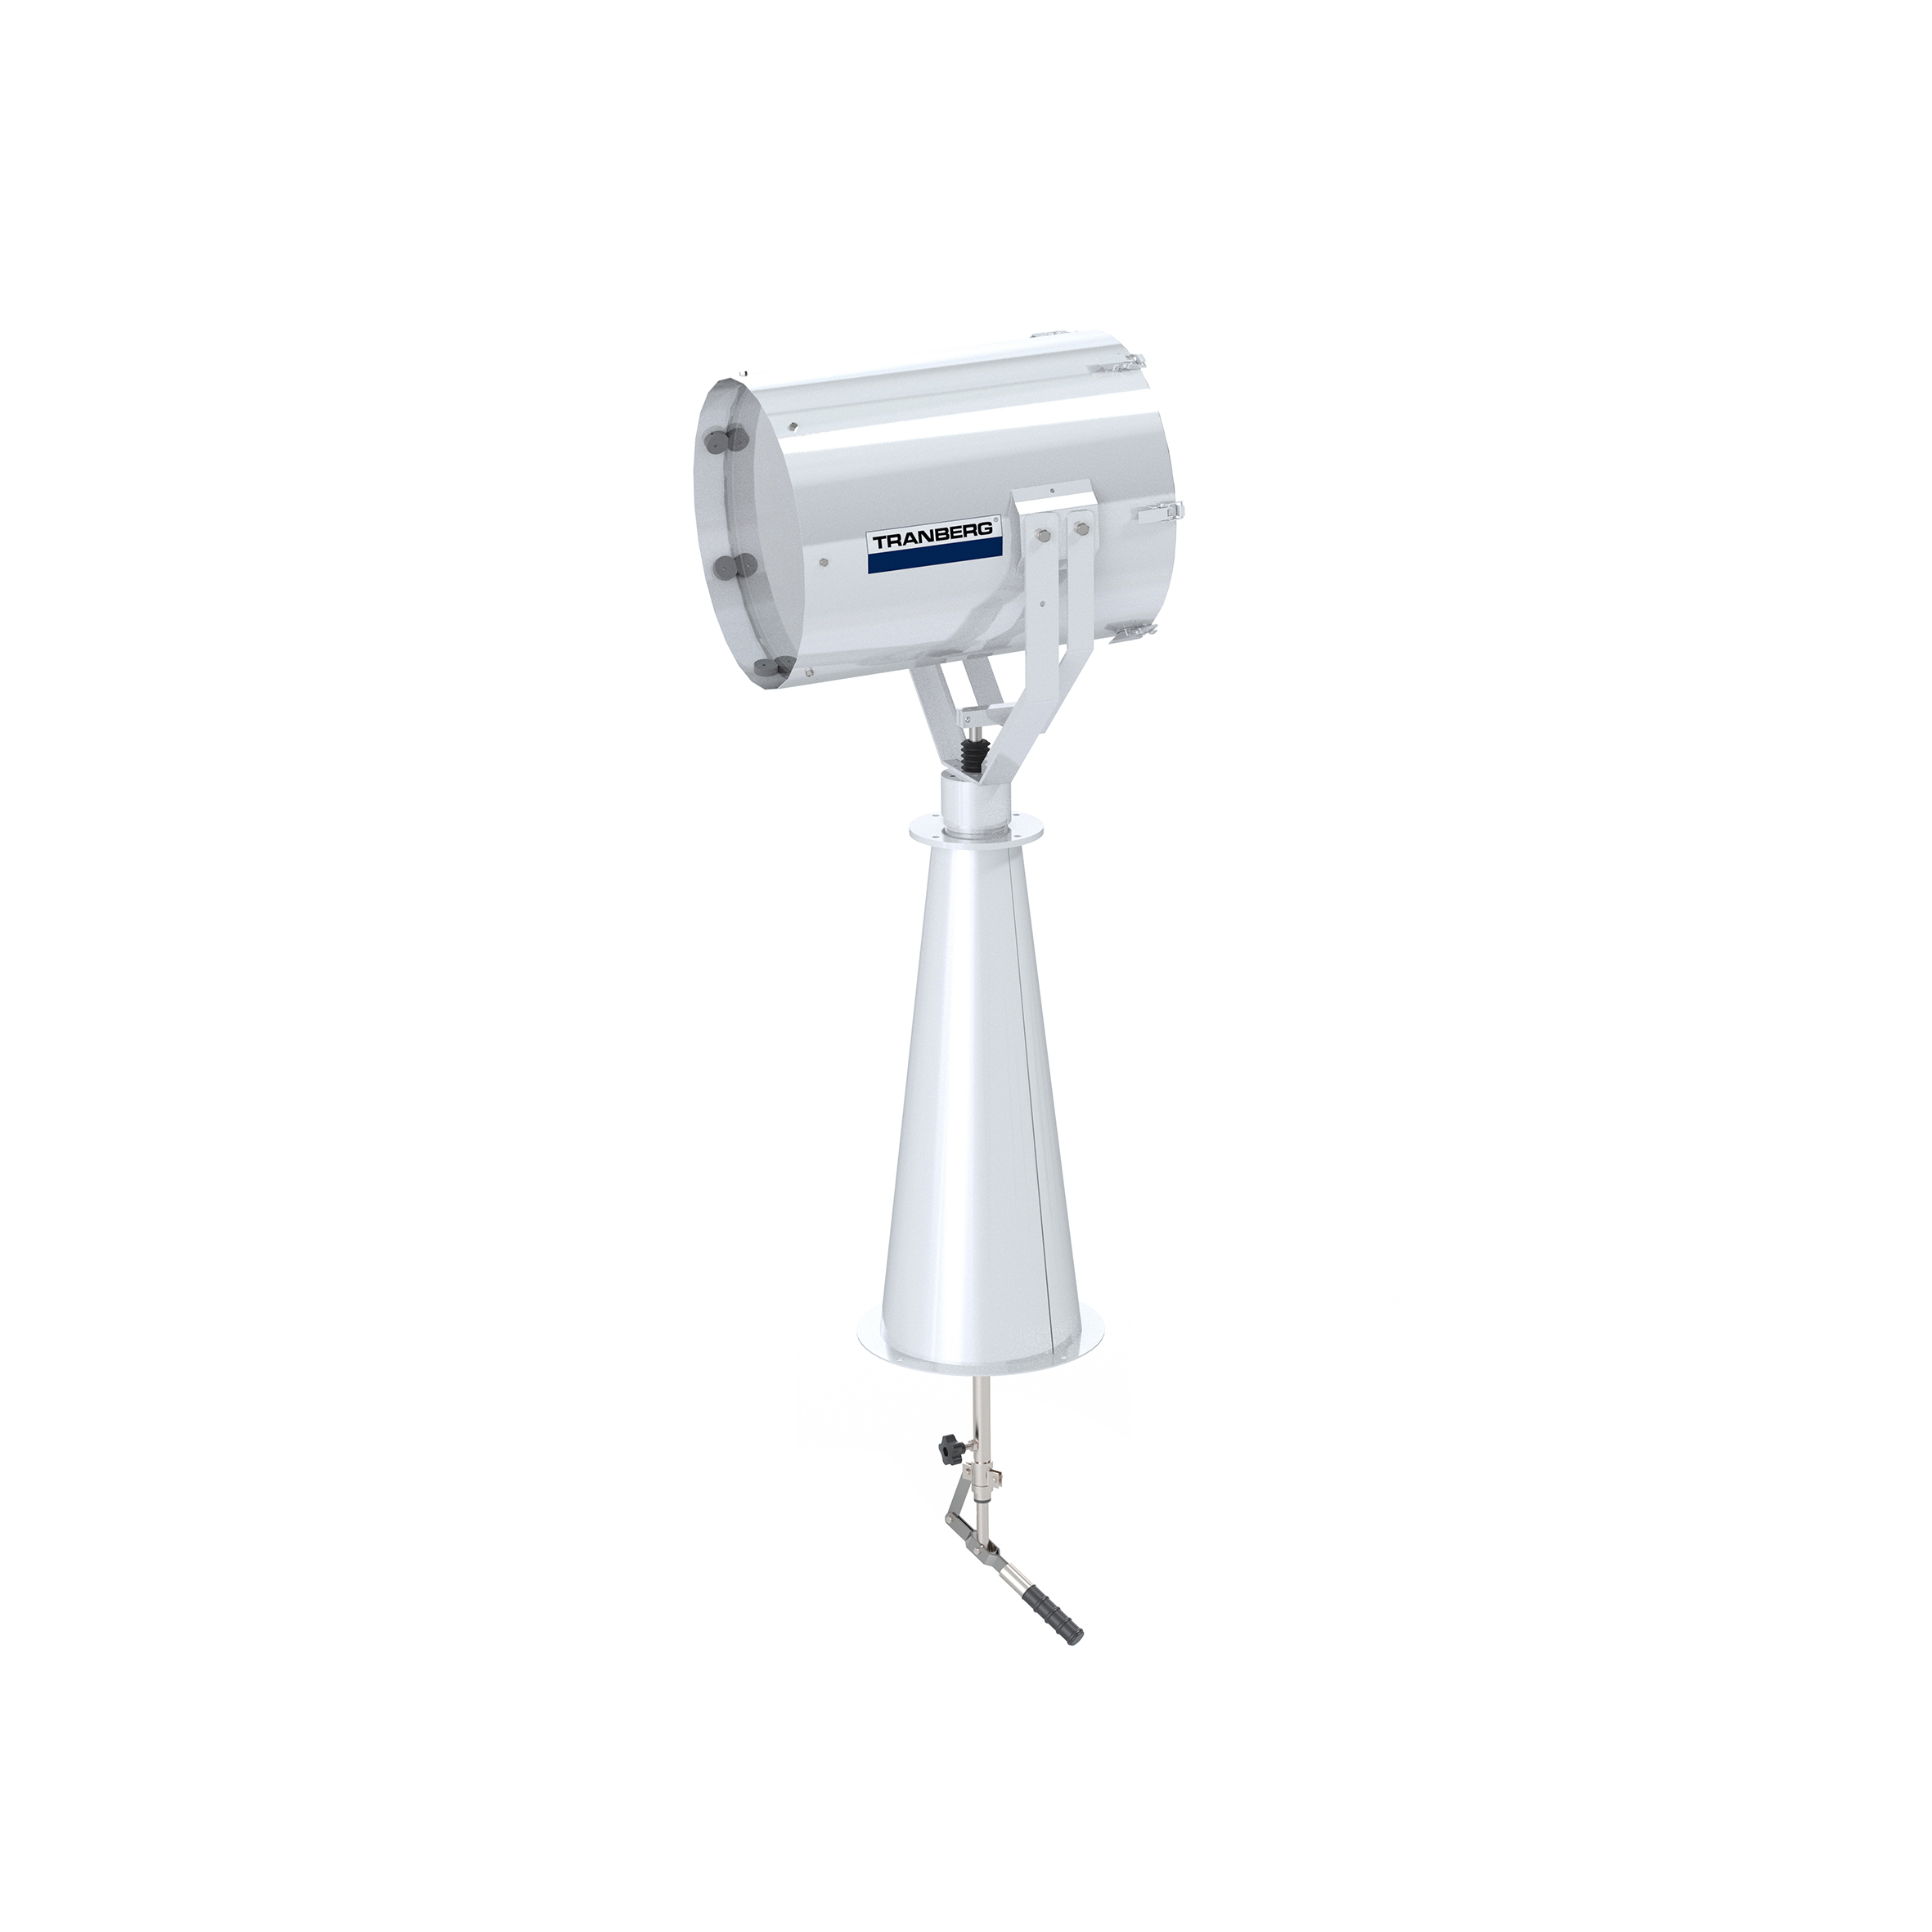 TEF 2630 Searchlight: Halogen 1000W bulb incl, 110V, Bridge Controlled, Stainless Steel, W/300 mm pe